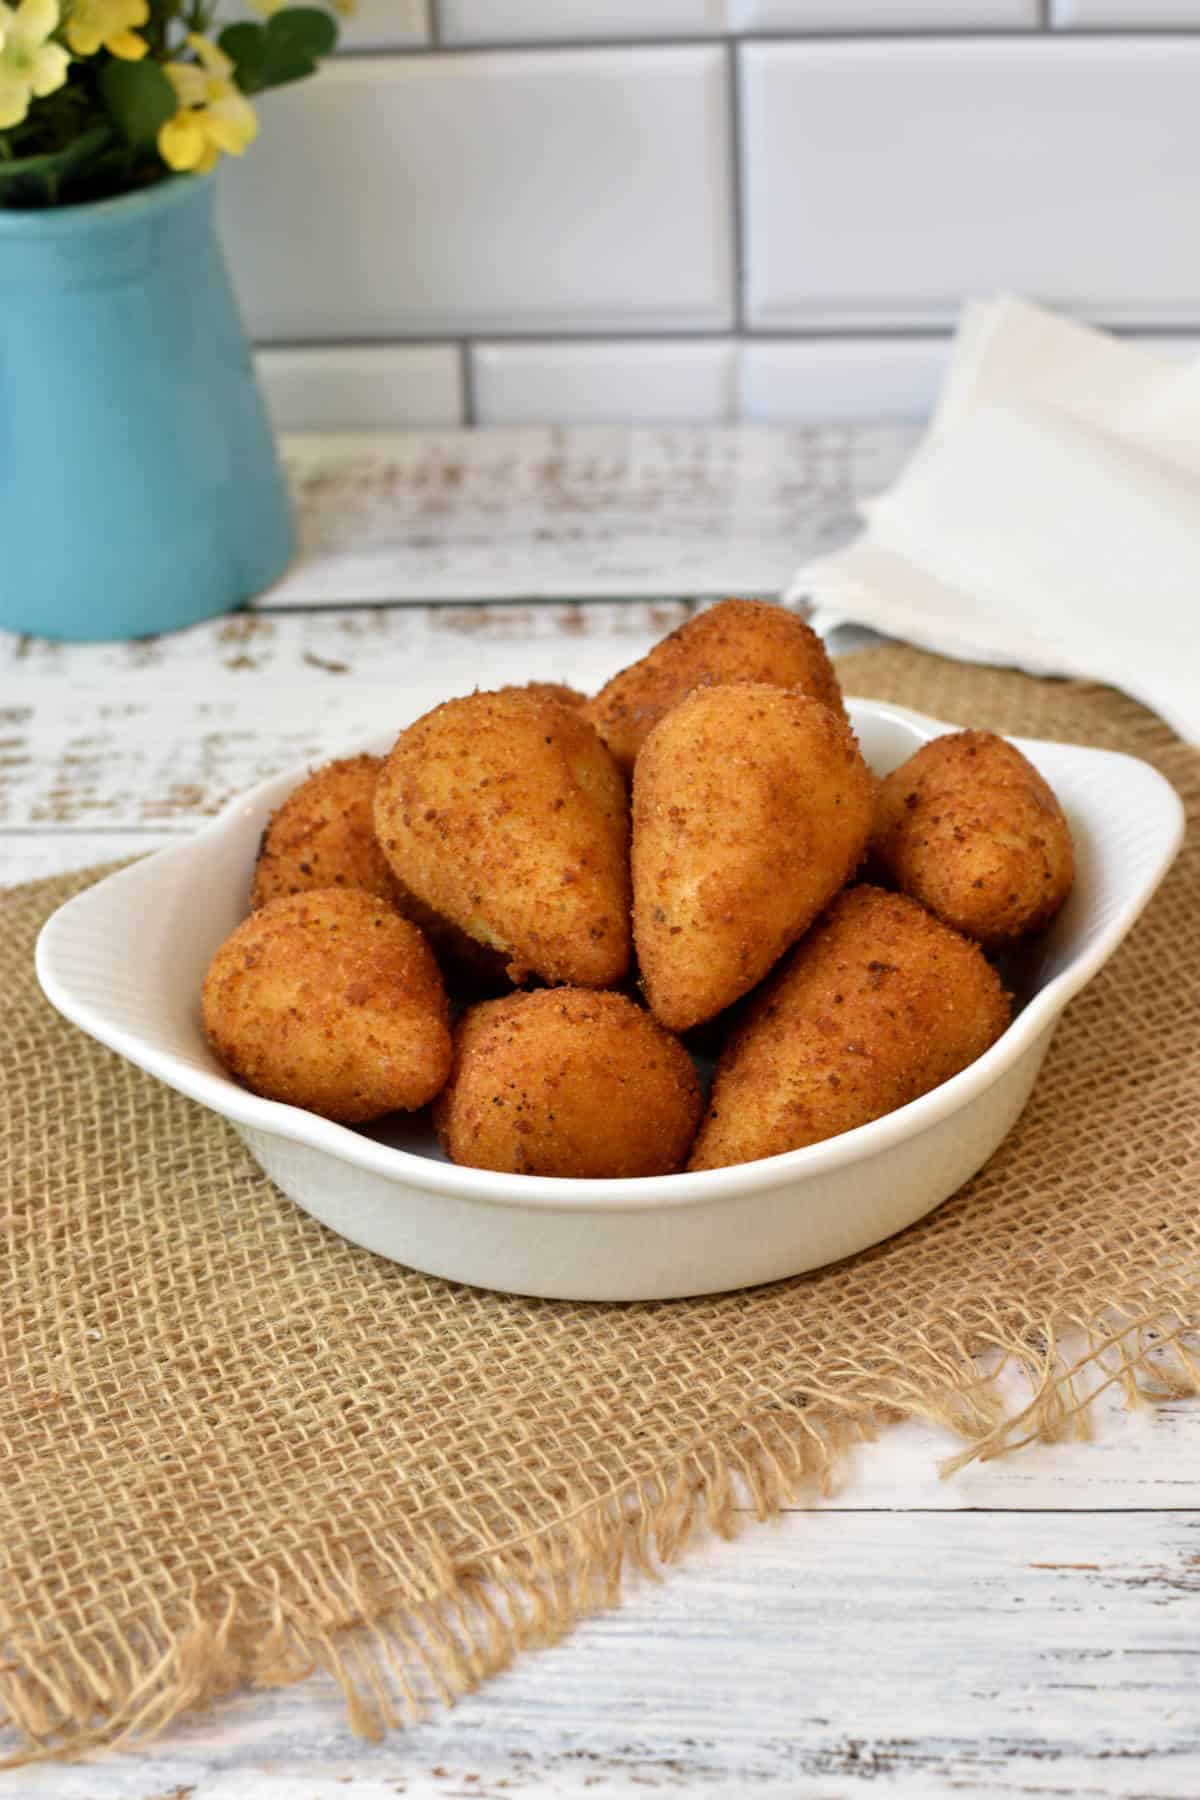 Some Brazilian chicken croquettes in a shallow white dish